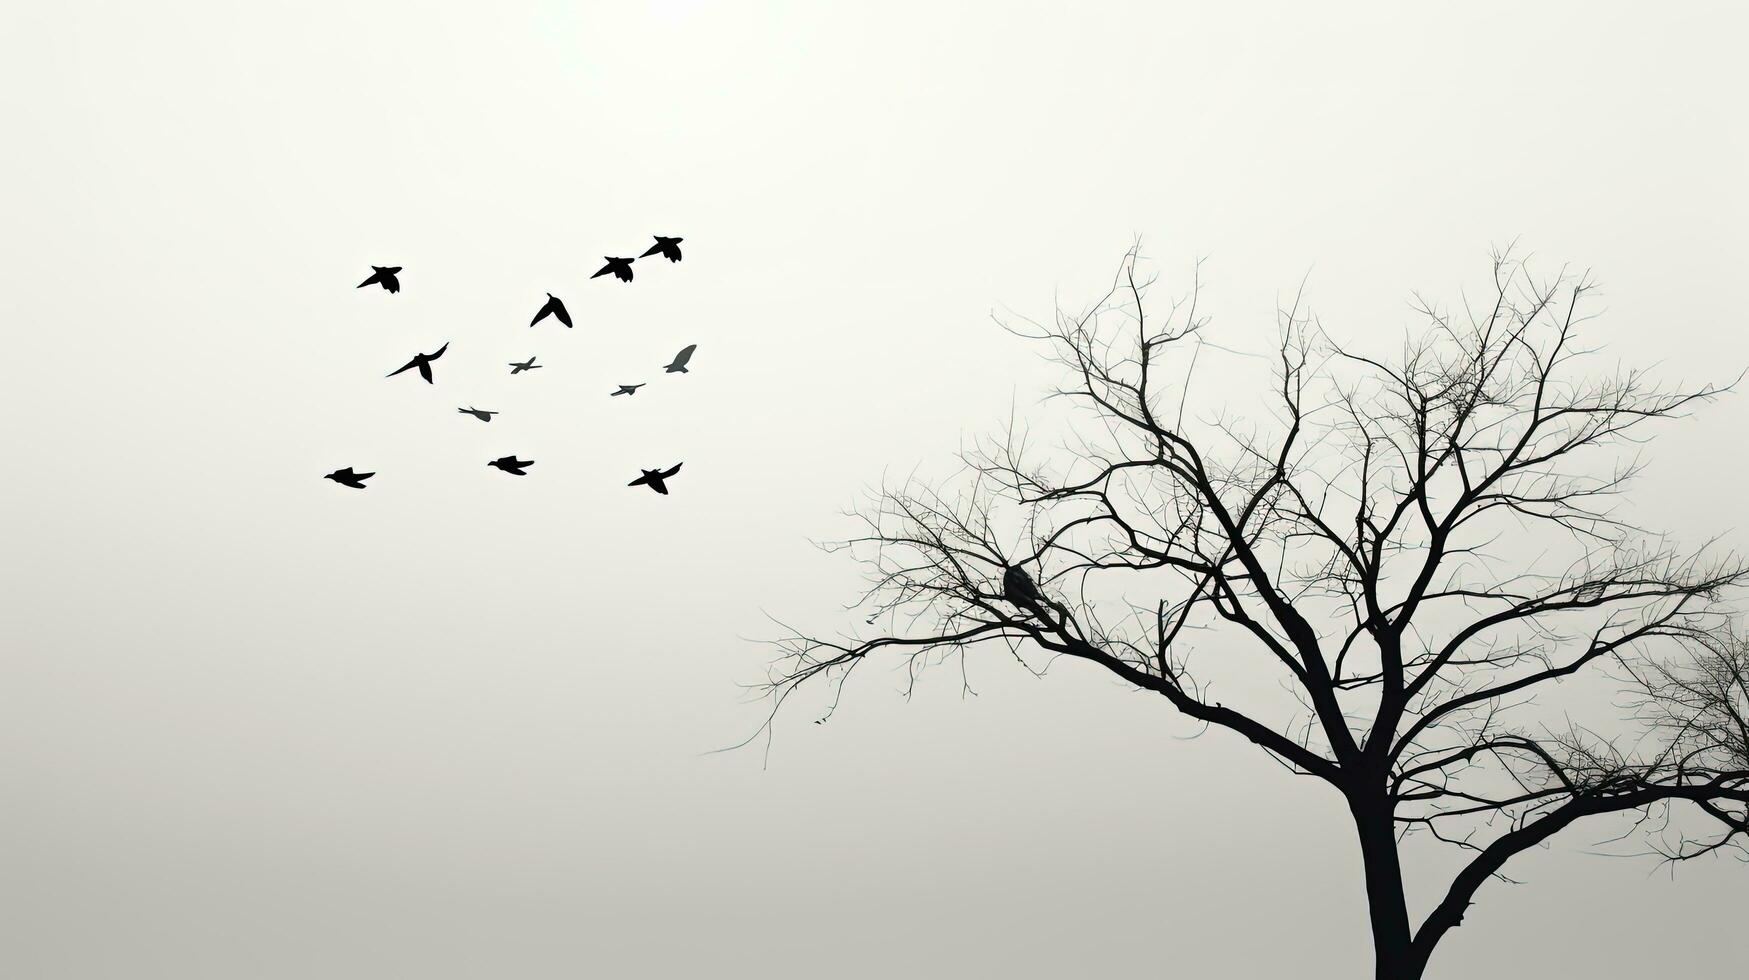 Monochrome picture of bird shadows on tree branches. silhouette concept photo